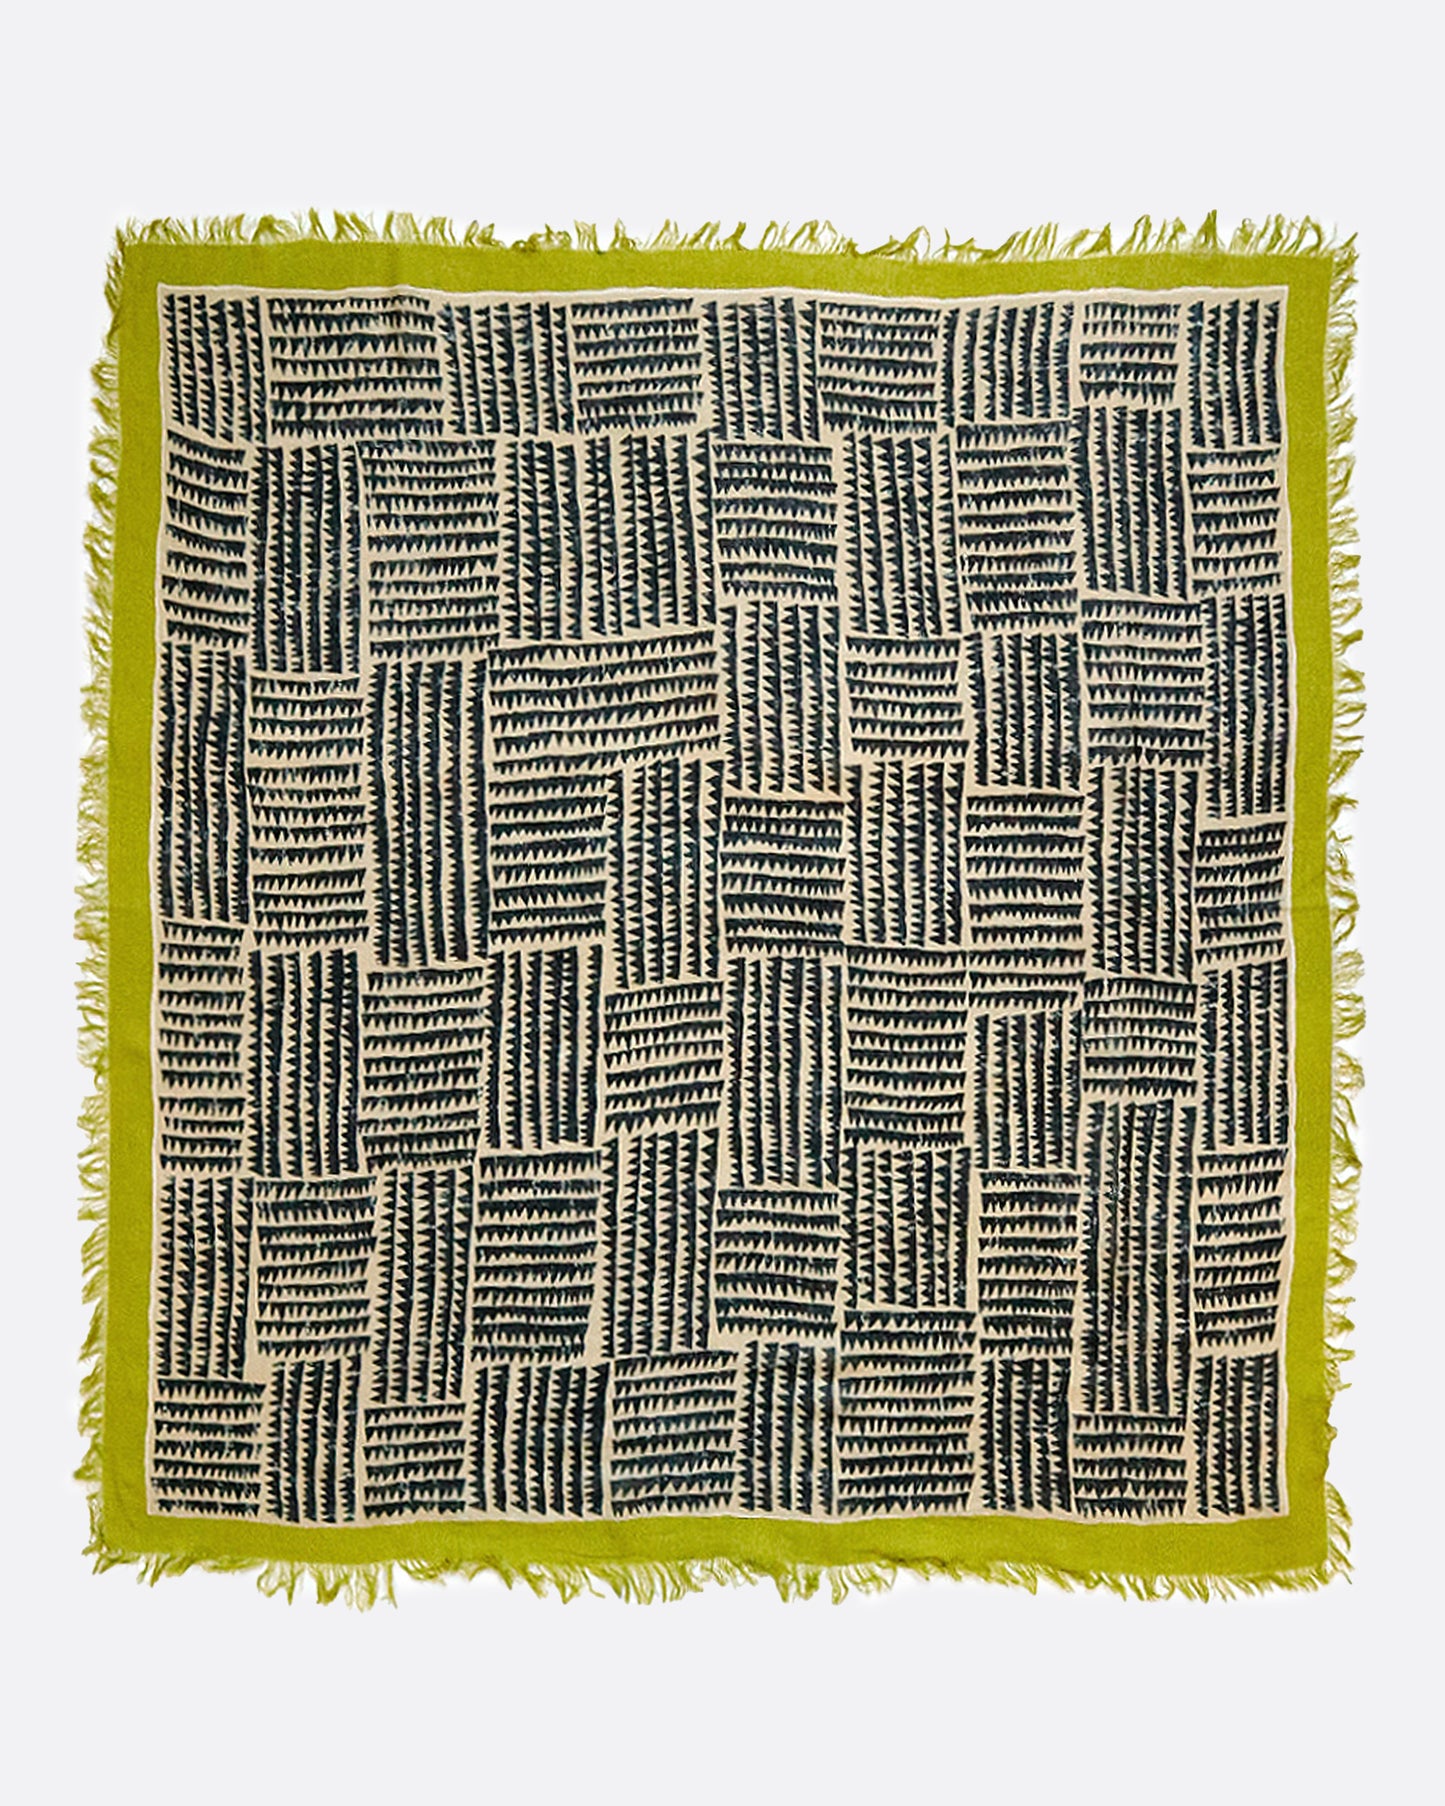 A large, fringy stole covered in a sawtooth block pattern with lime green edges.​